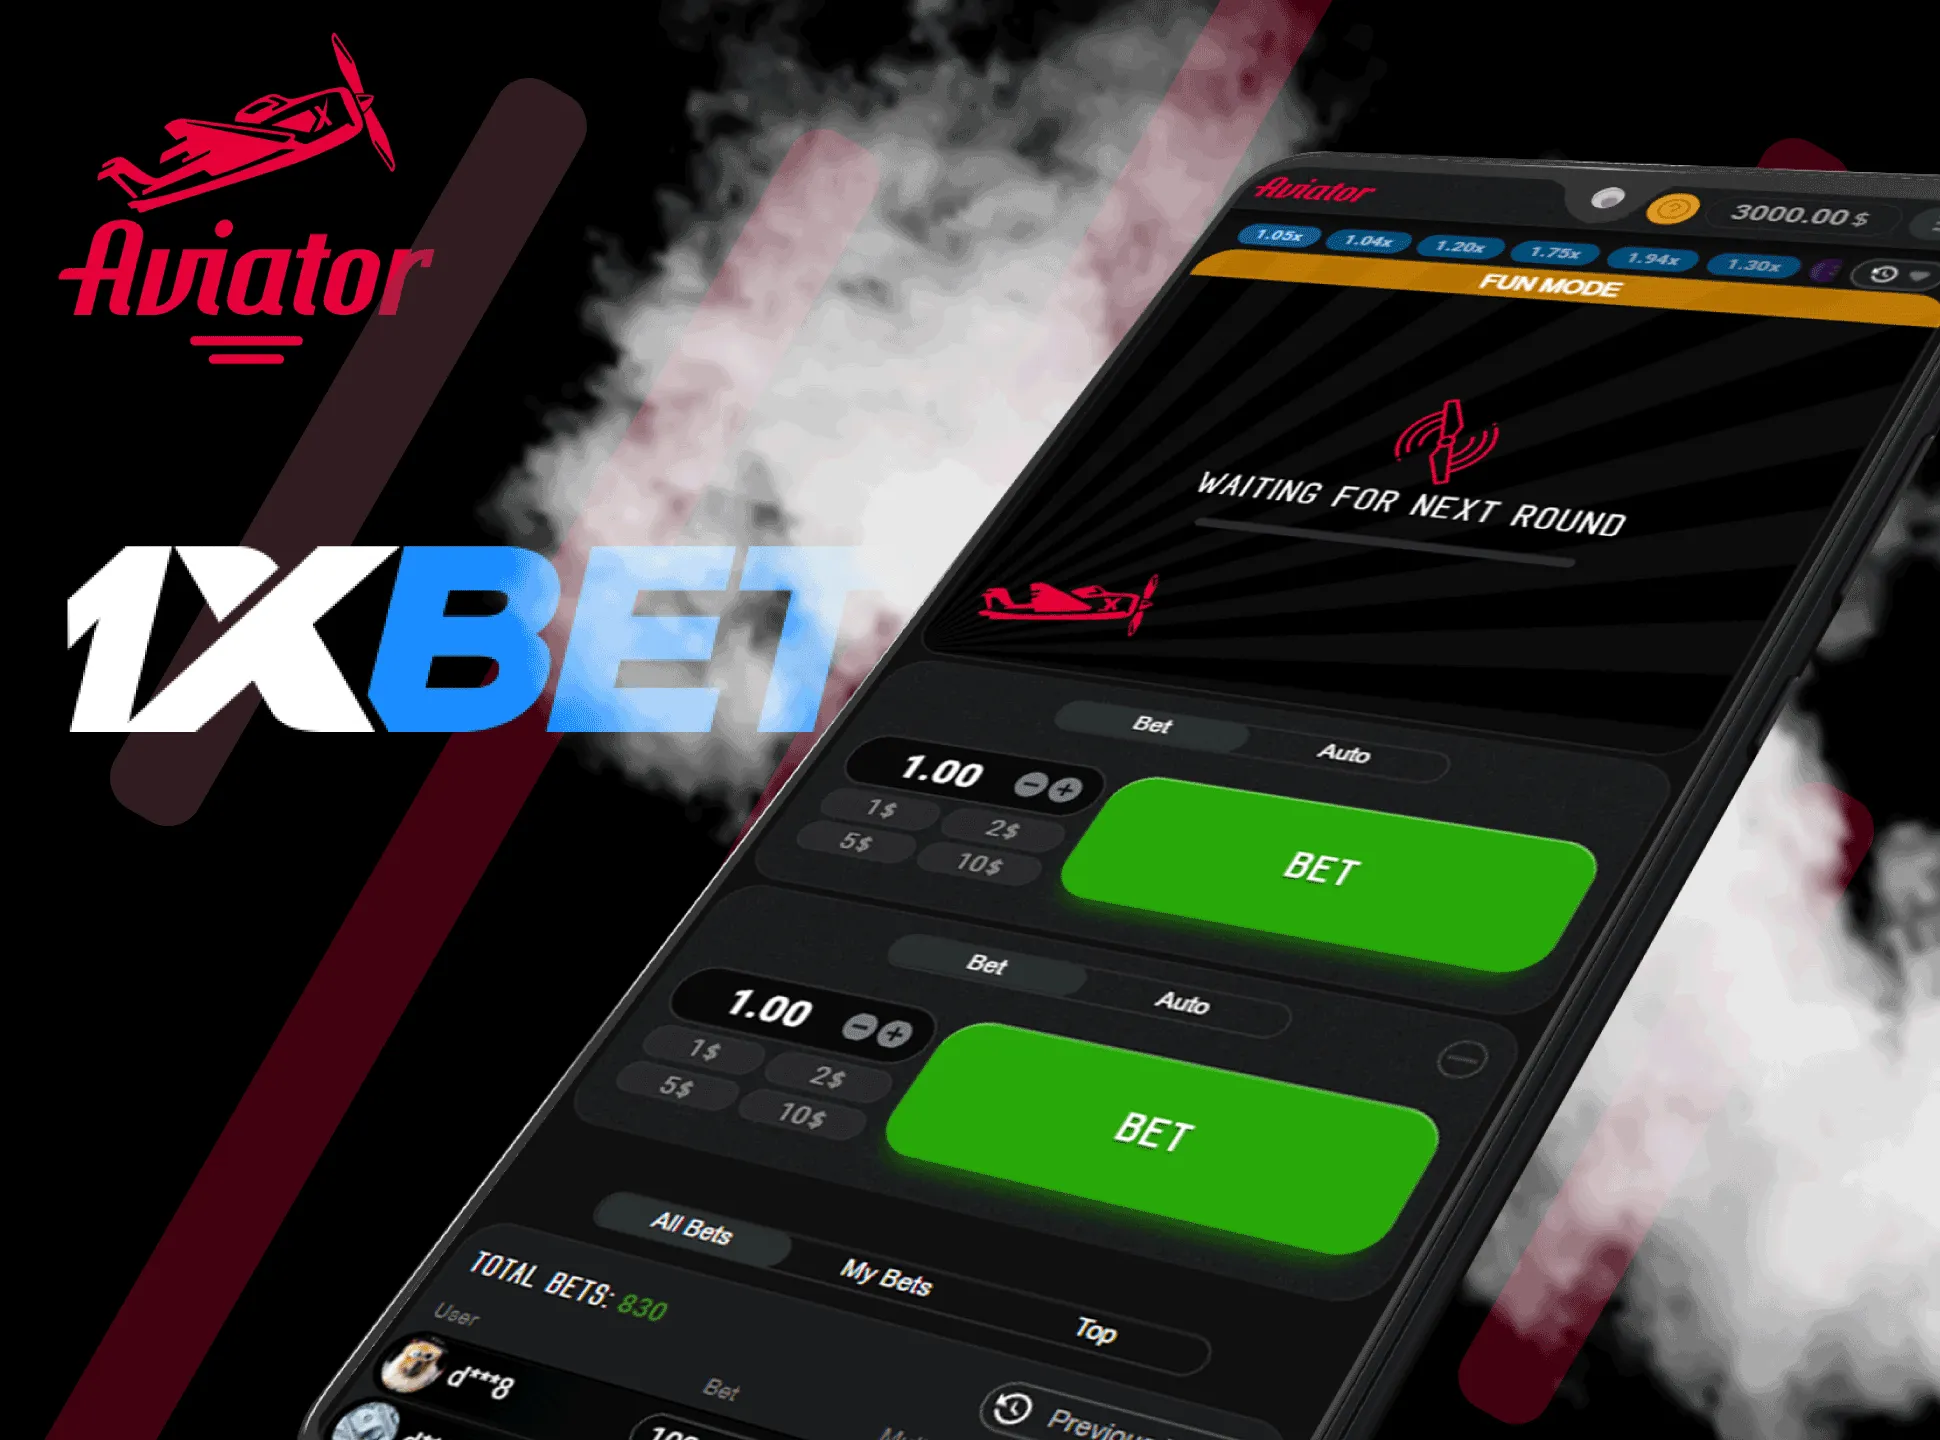 1xbet is one of the oldest online casinos with the Aviator game.